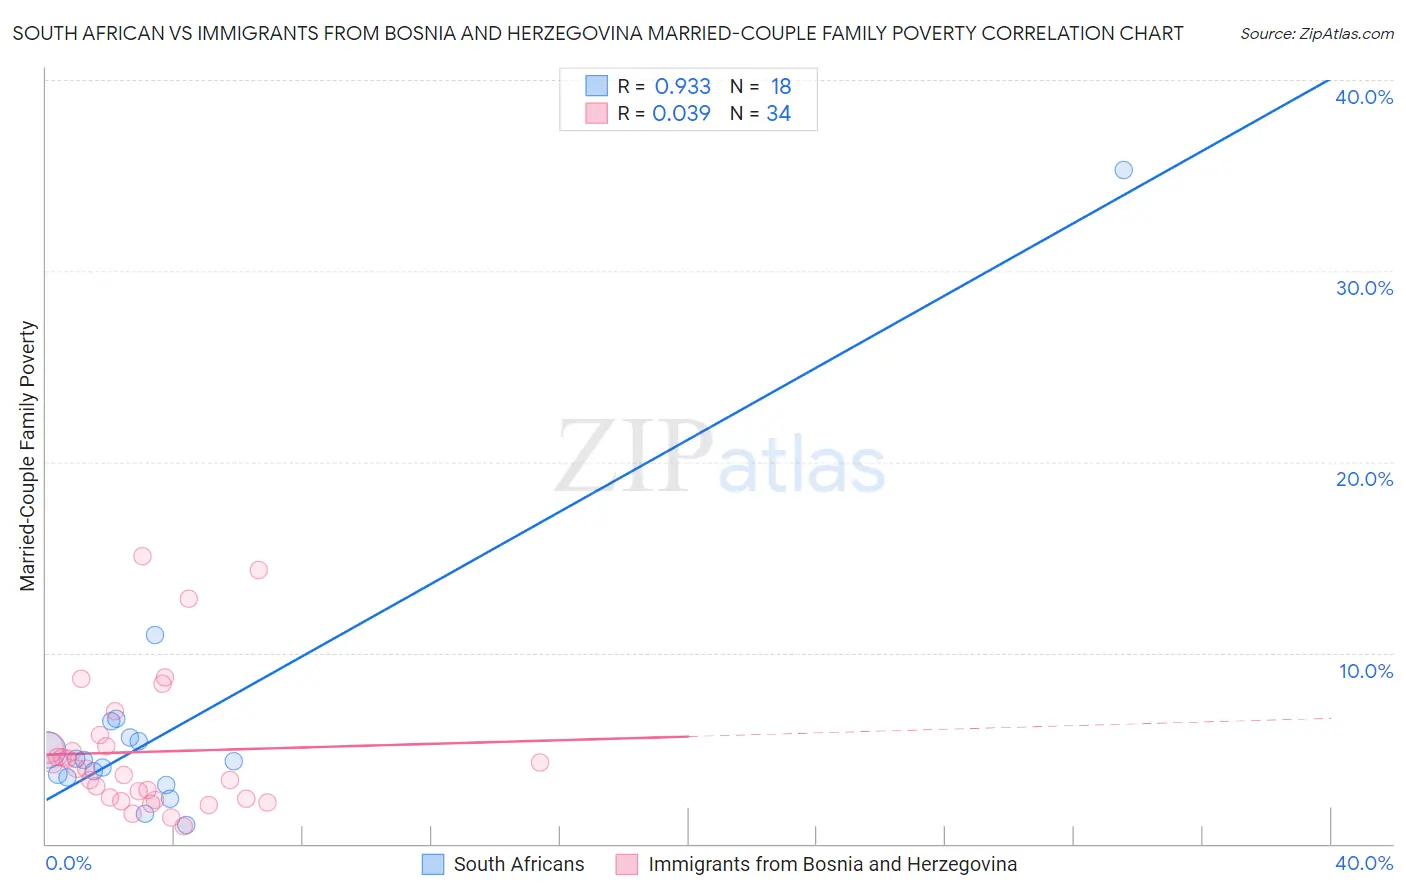 South African vs Immigrants from Bosnia and Herzegovina Married-Couple Family Poverty